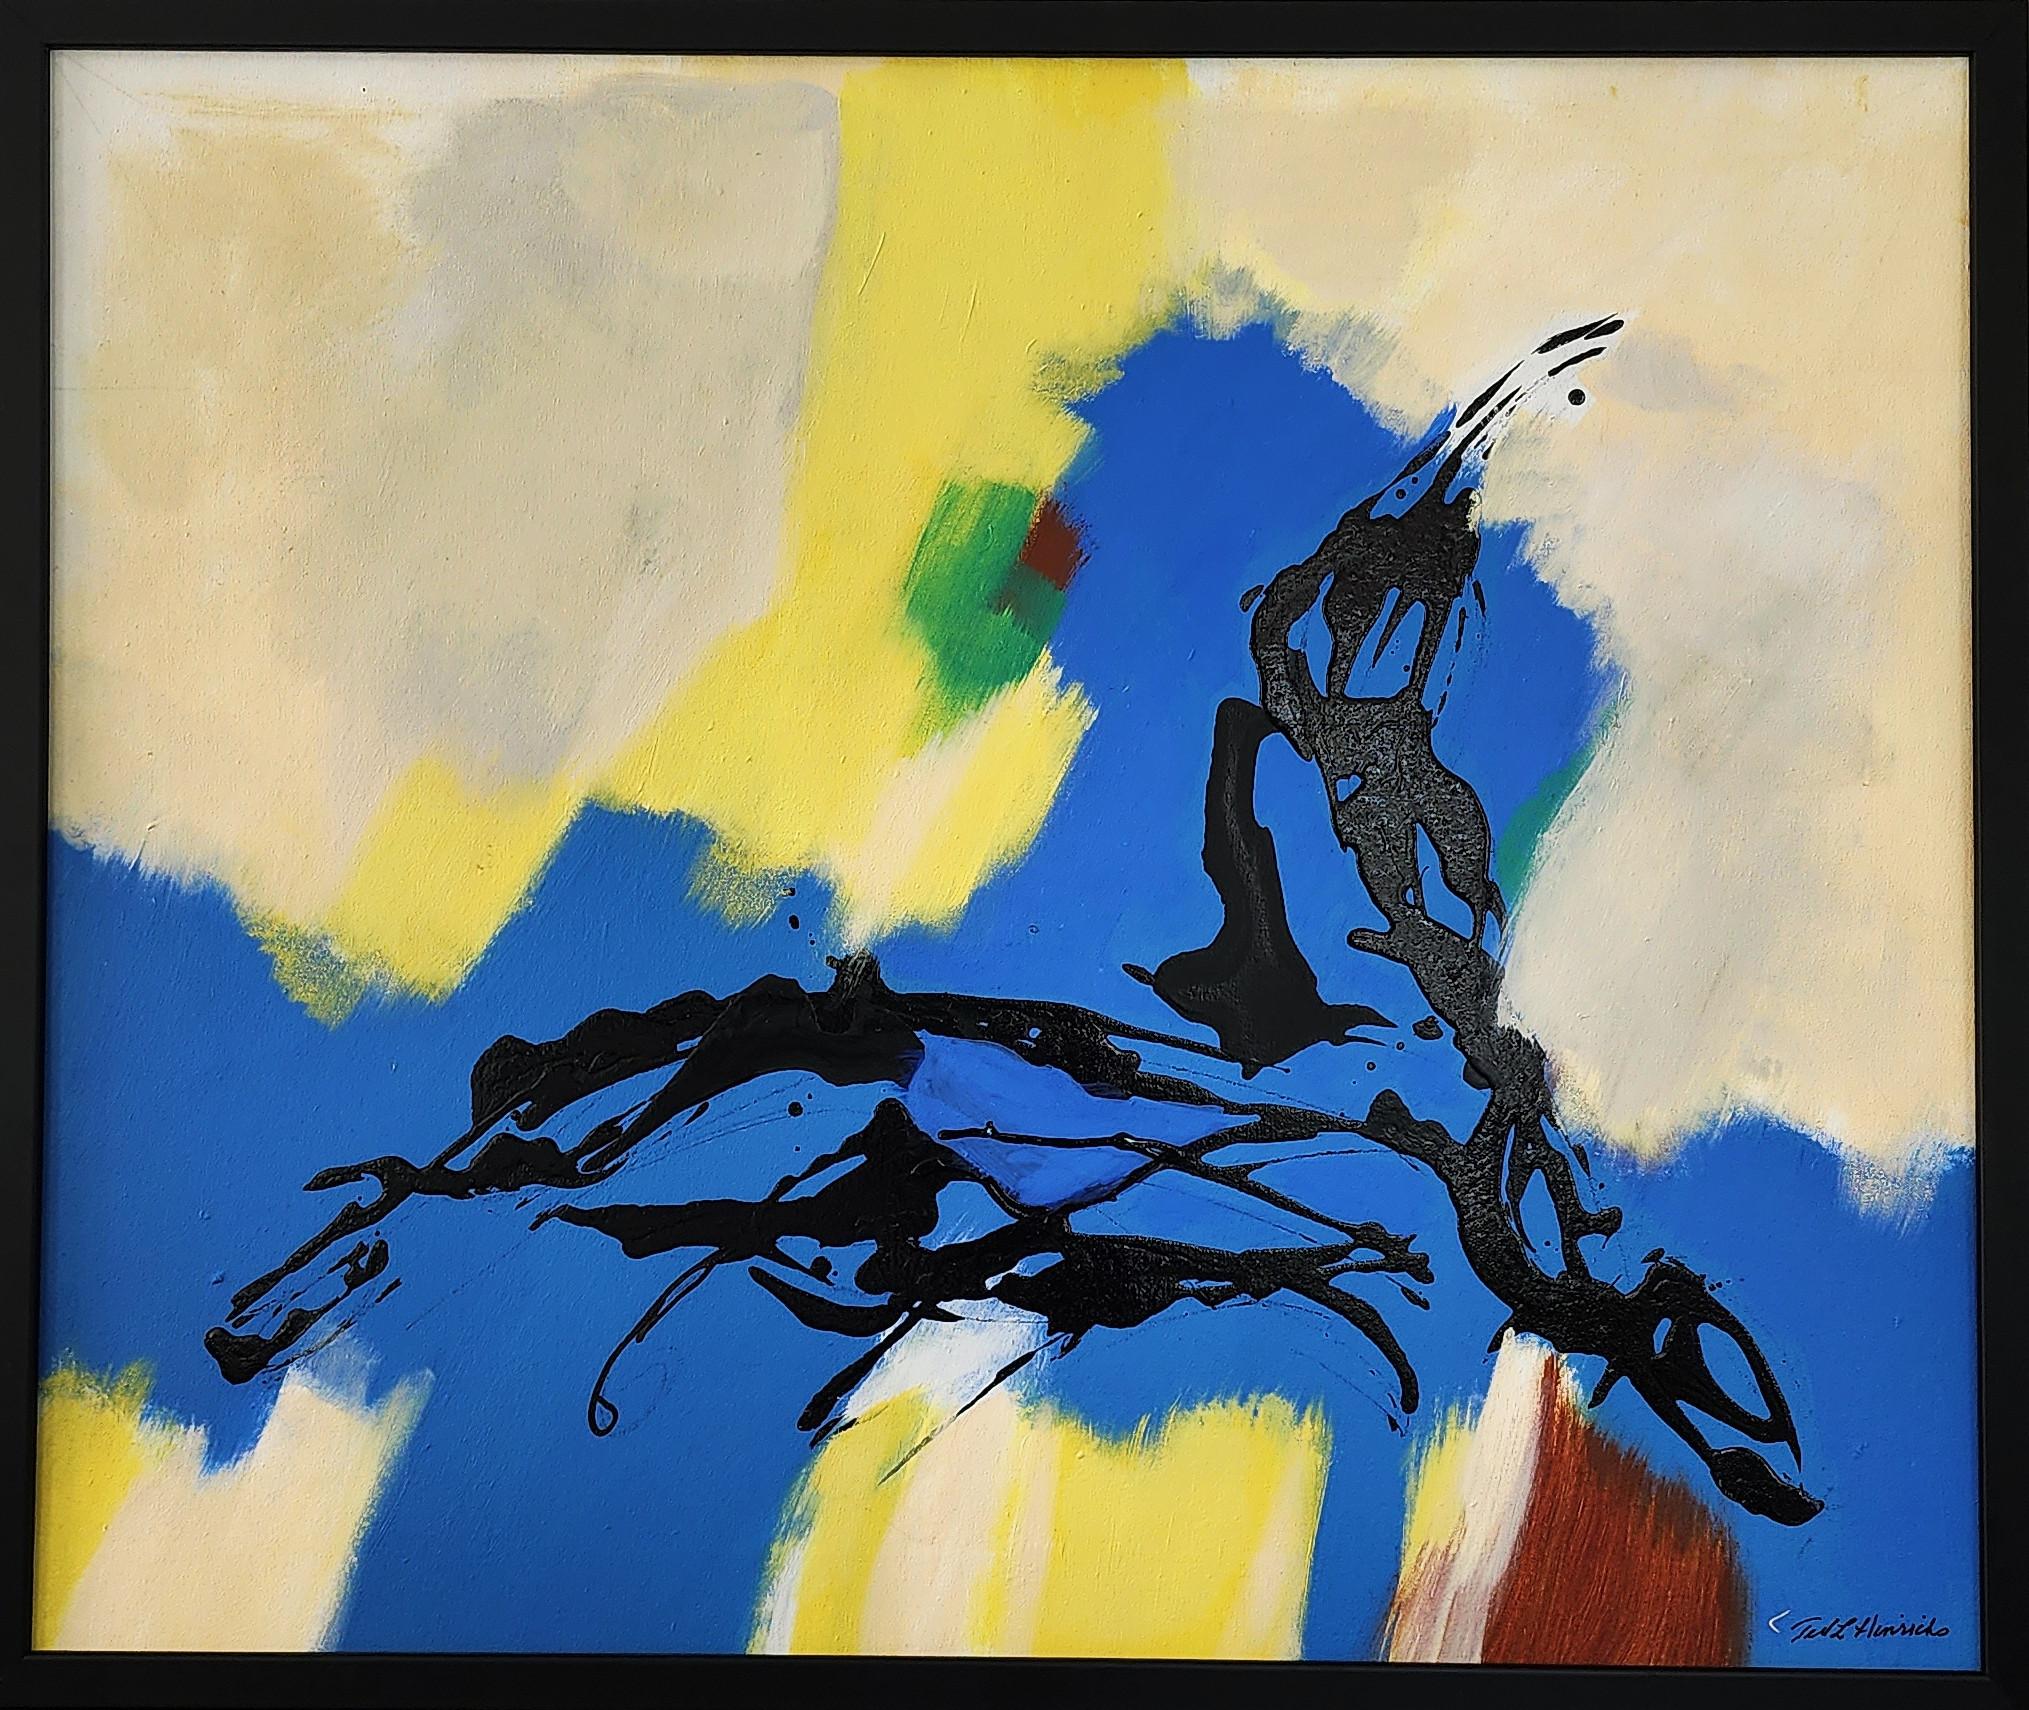 Abstract Painting Ted Hinrichs - Casual (Abstraction gestuelle, Bleu, Noir, Jaune, Vert, Rouge, Minimal)